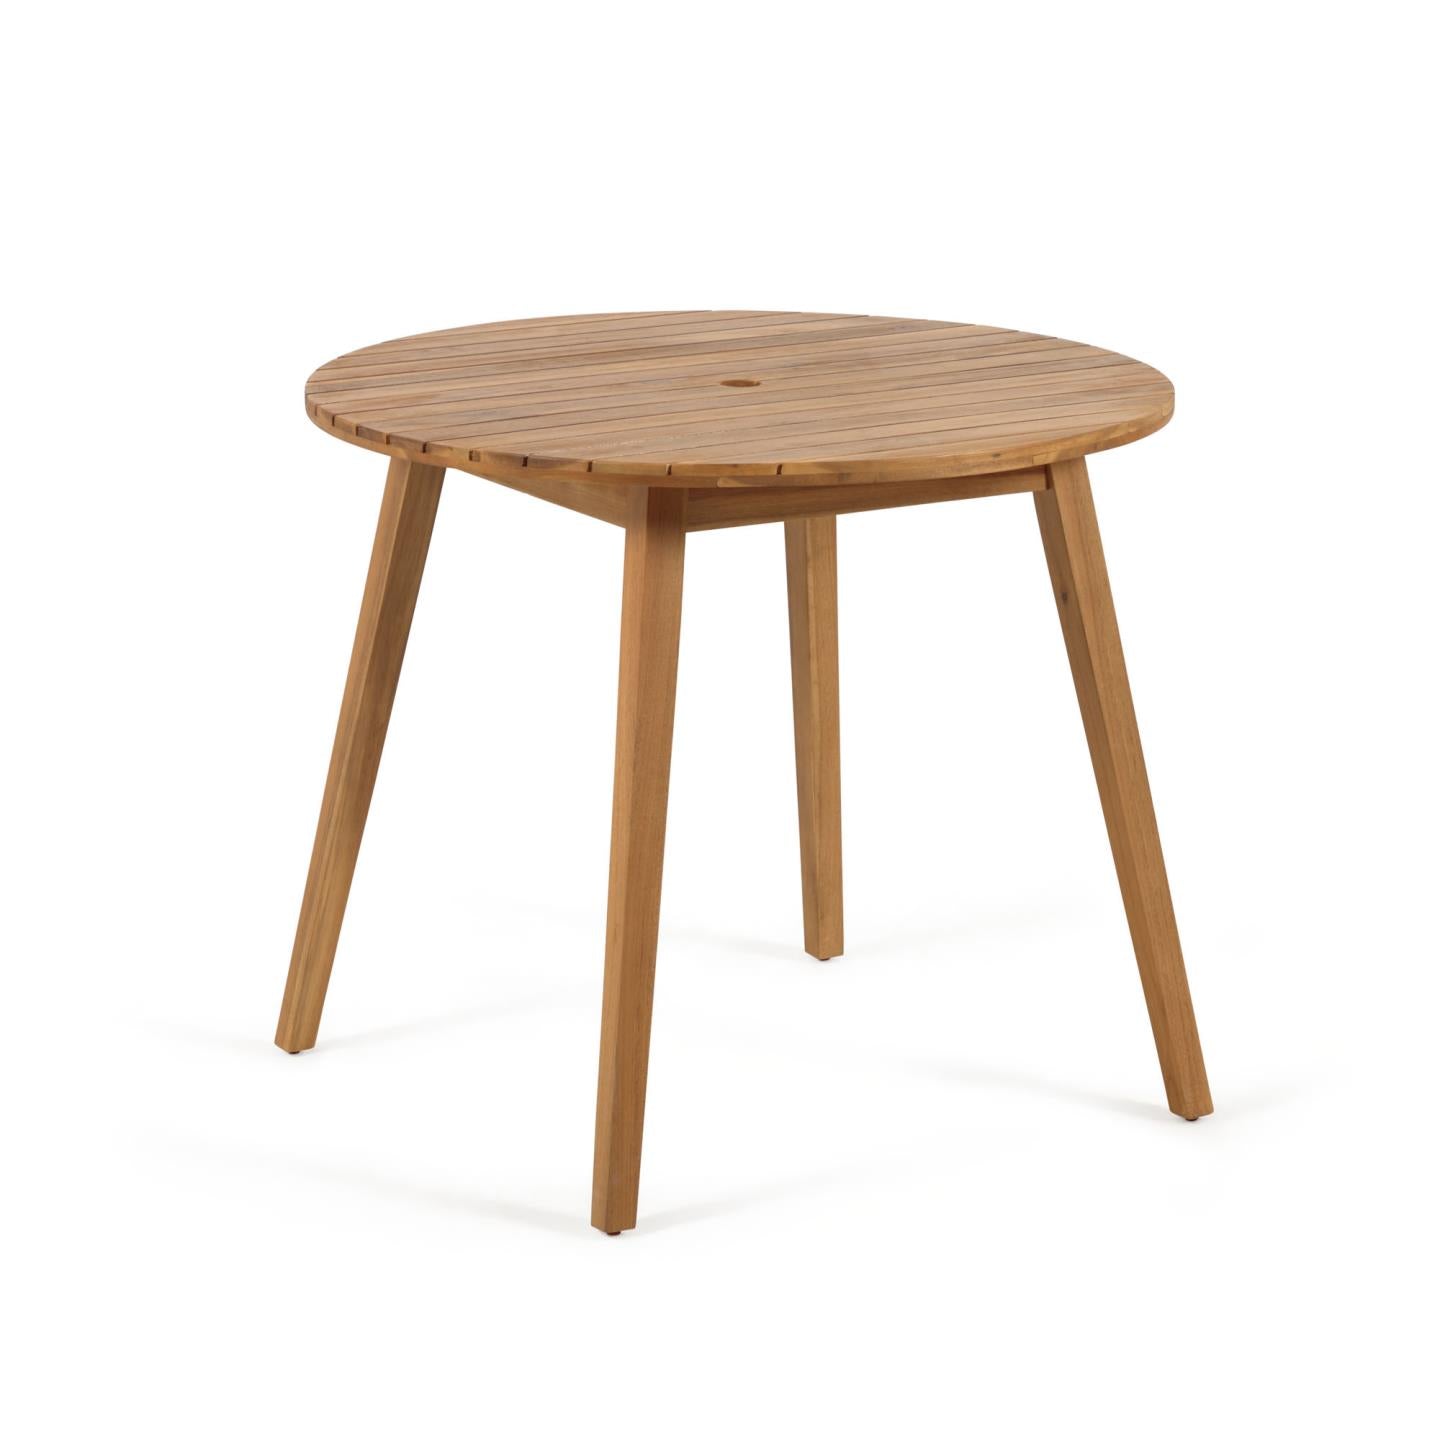 Vilma round outdoor table made of solid acacia wood Ø 90 cm 100% FSC